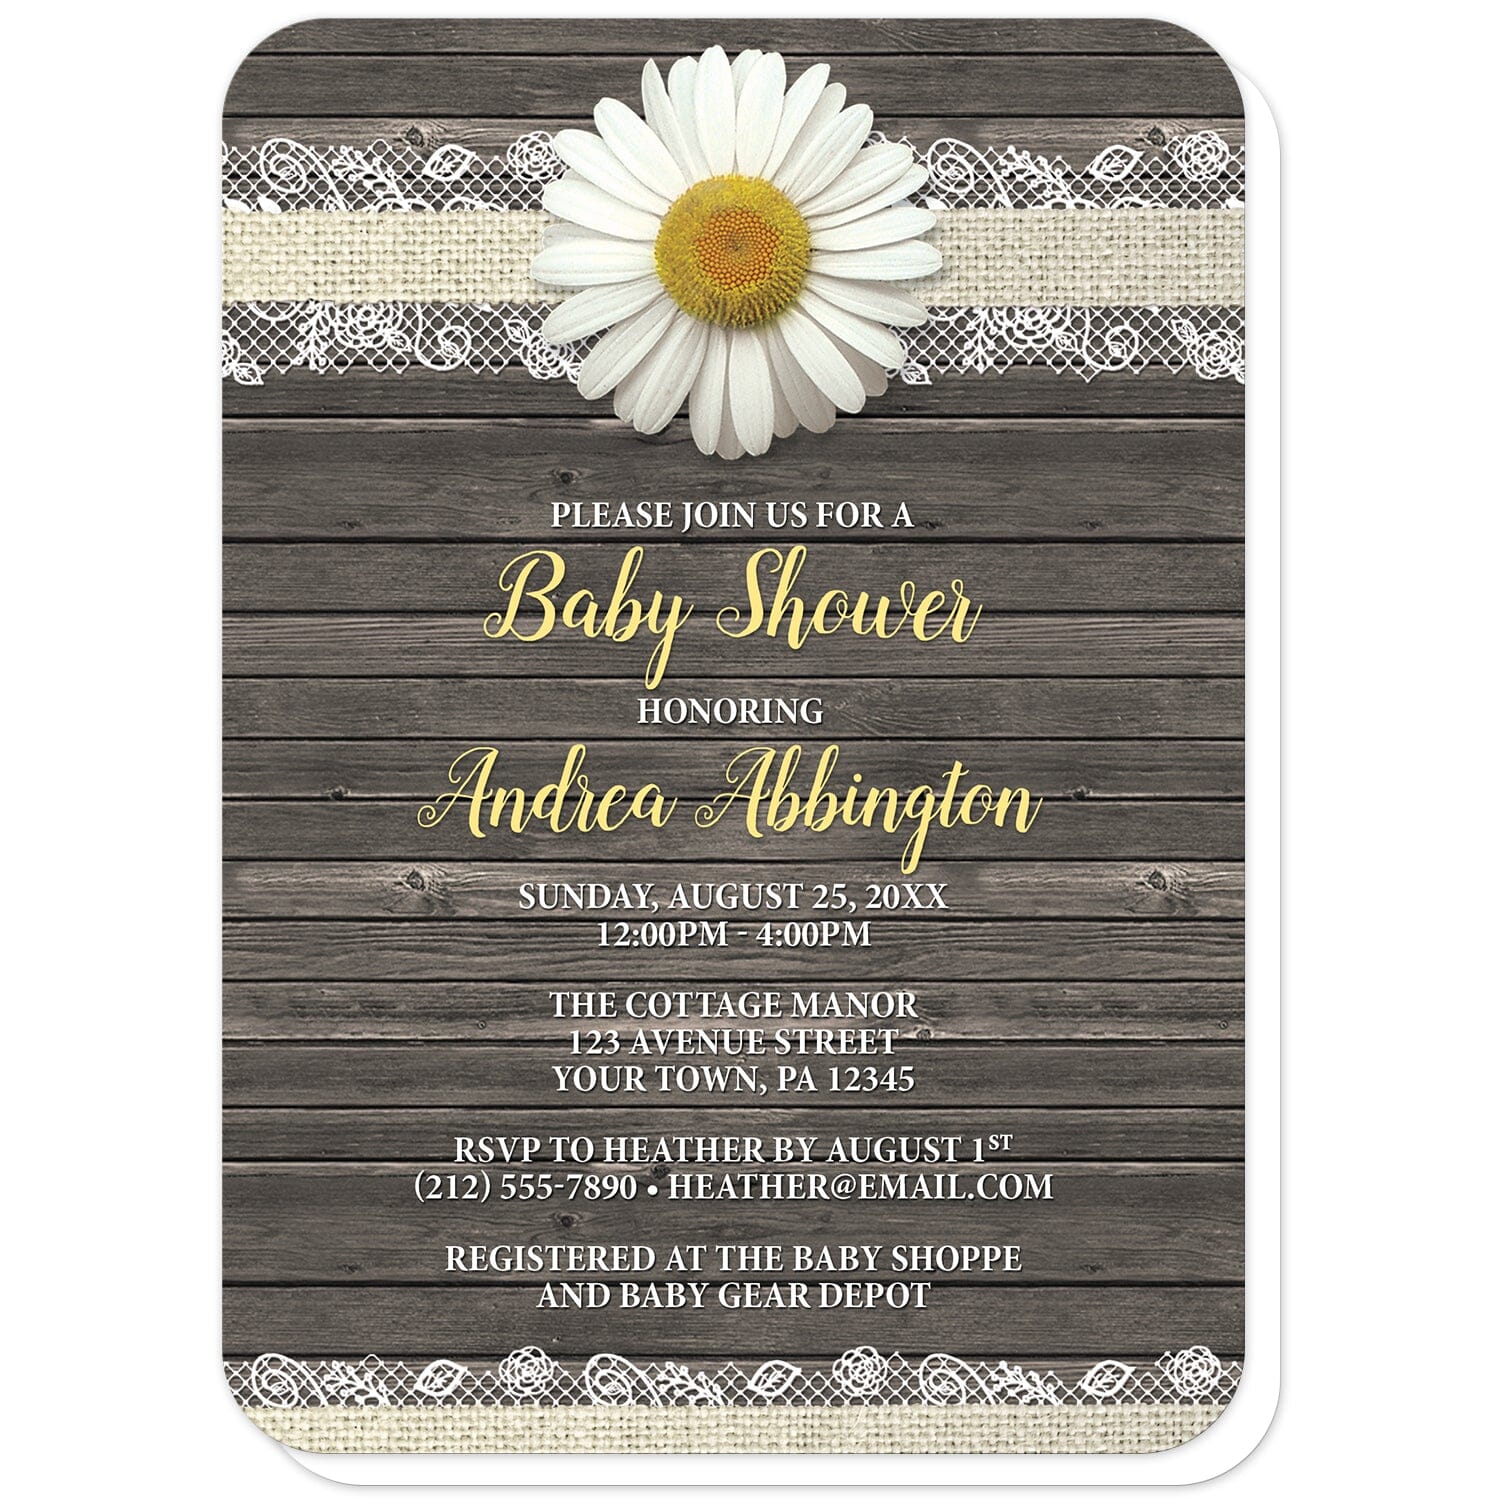 Daisy Burlap and Lace Wood Baby Shower Invitations (with rounded corners) at Artistically Invited. Southern rustic daisy burlap and lace wood baby shower invitations with a white daisy flower centered at the top on a burlap and lace ribbon strip illustration, over a brown country wood background. Your personalized baby shower celebration details are custom printed in yellow and white over the wood design. 